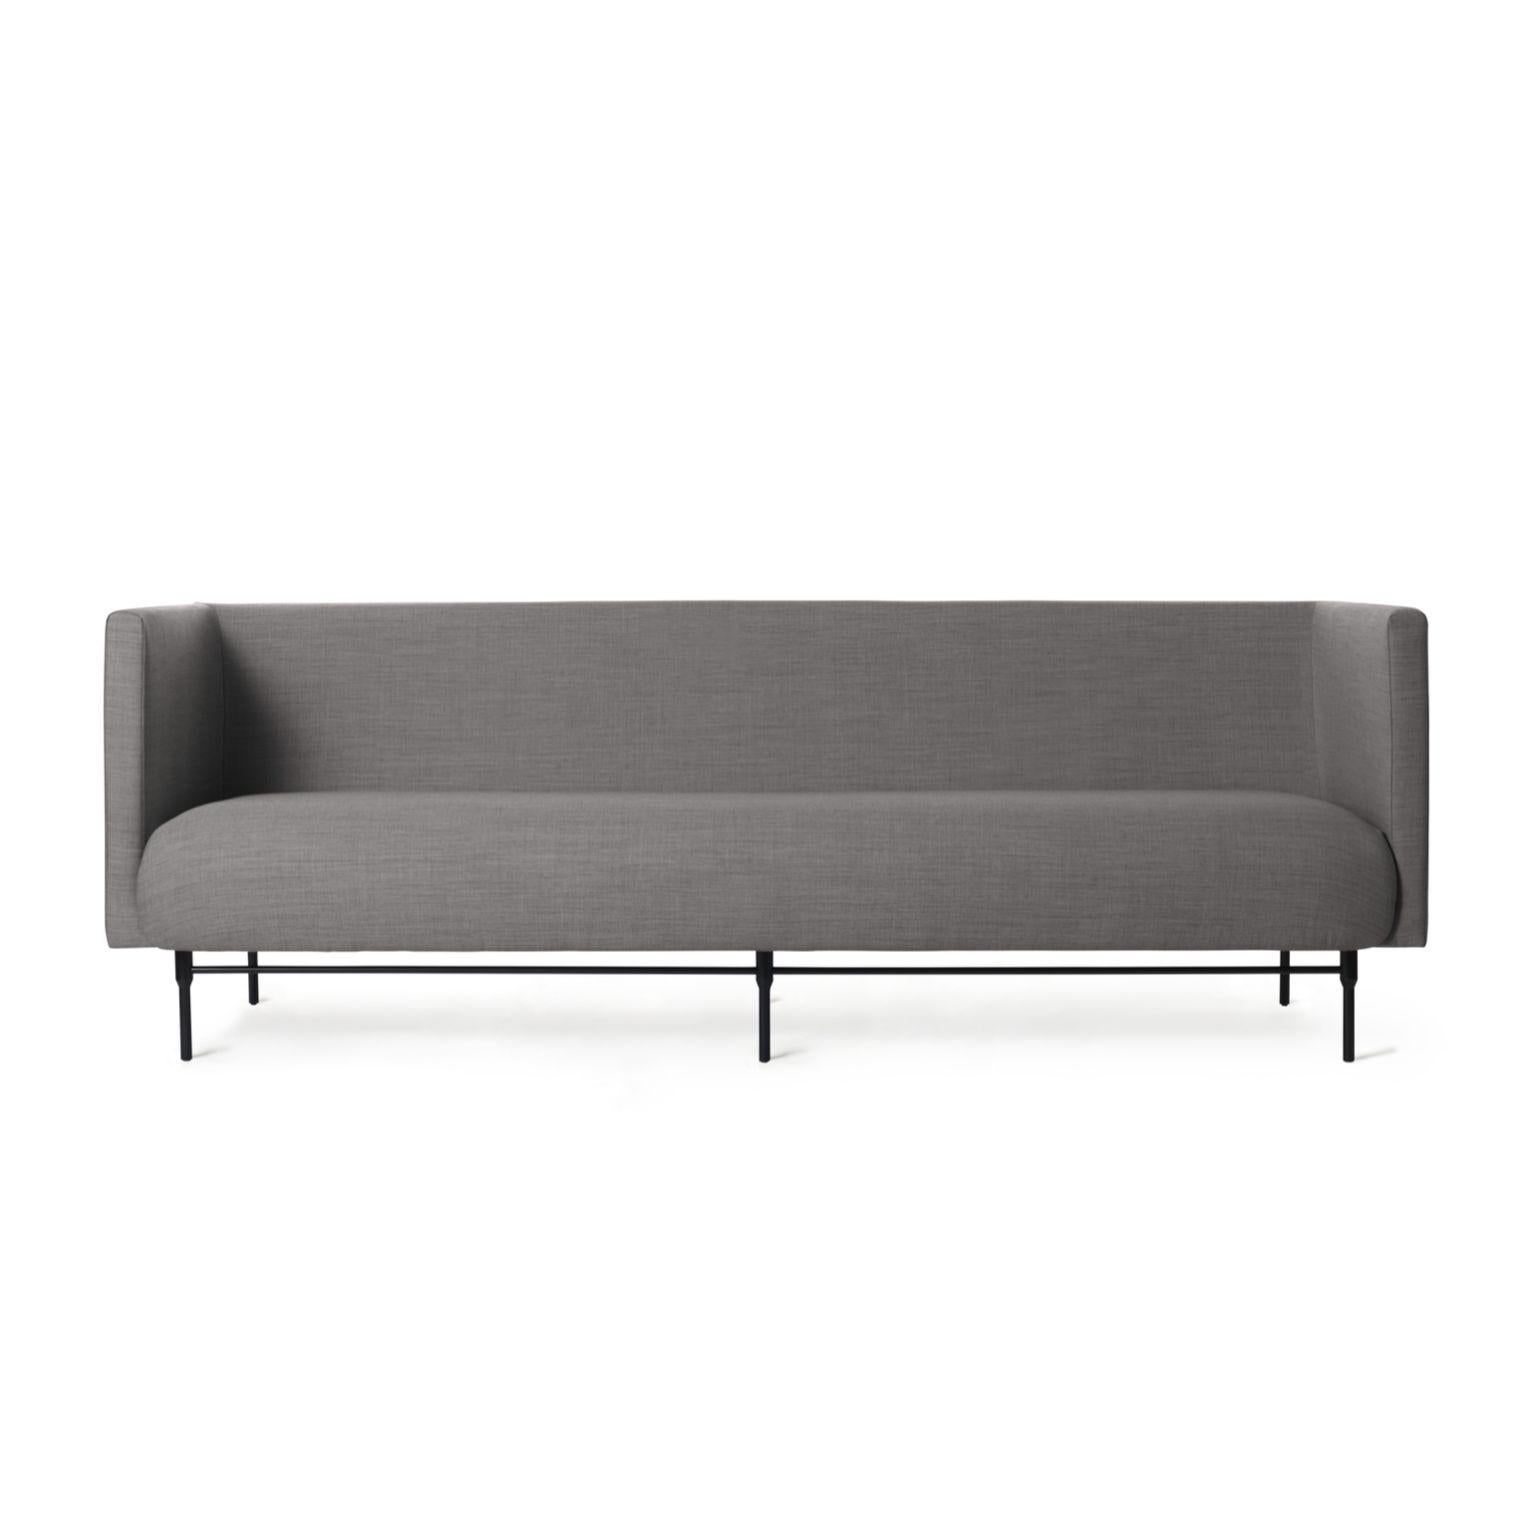 Galore 3 seater grey Melange by Warm Nordic
Dimensions: D222 x W83 x H 76 cm
Material: Textile upholstery, Powder coated black steel legs, Wooden frame, foam, spring system.
Weight: 62 kg
Also available in different colours and finishes.